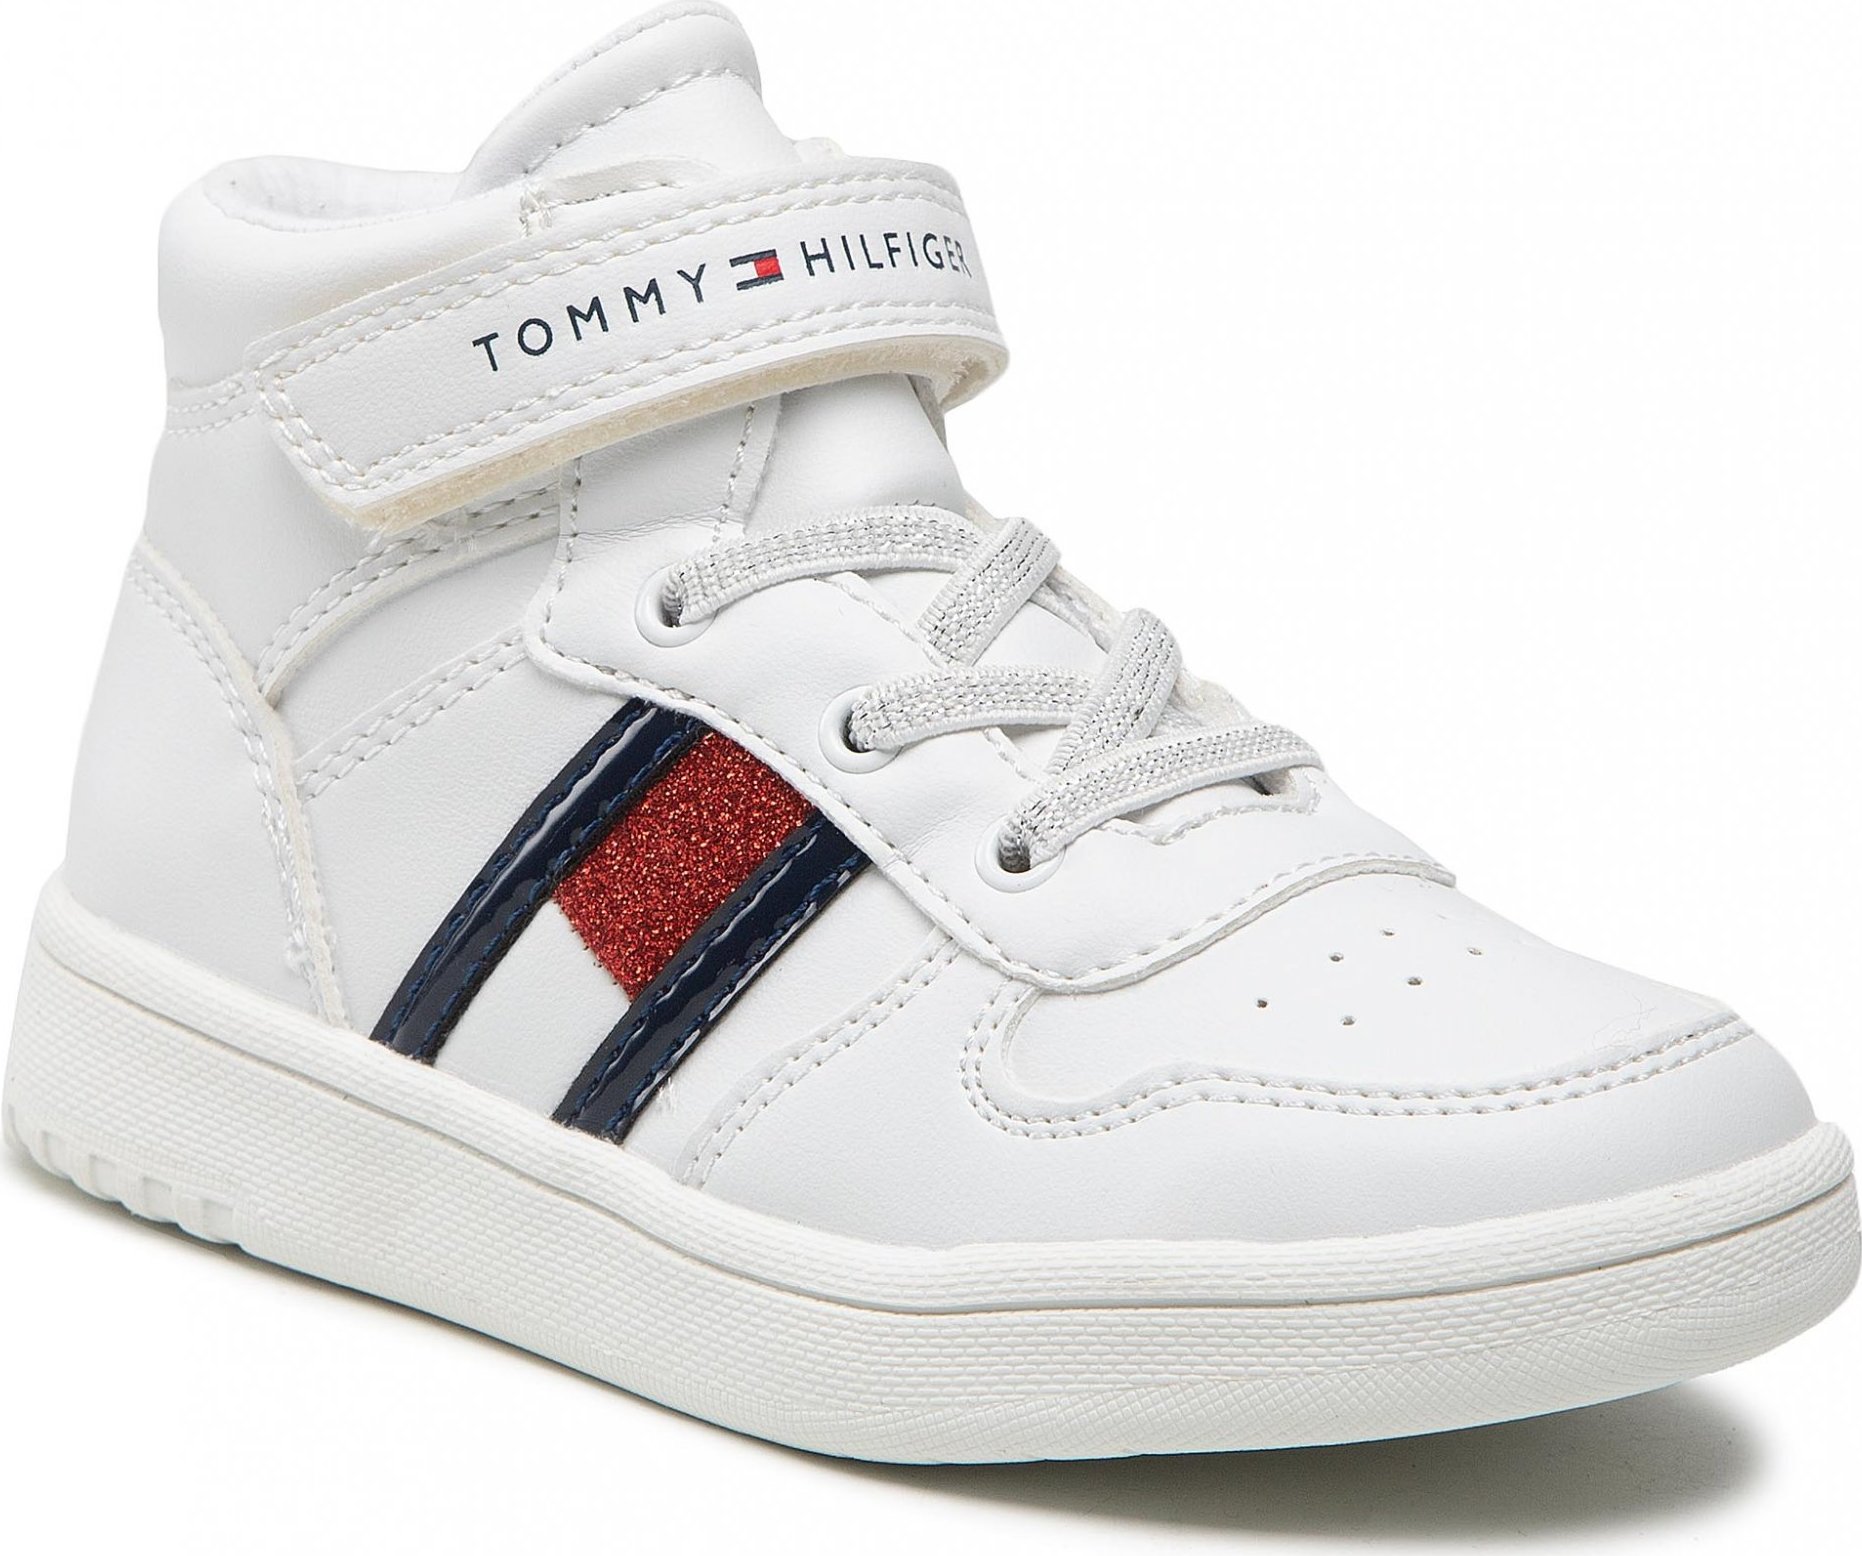 TOMMY HILFIGER Higt Top Lace-Up/Velcro Sneaker T3A9-32330-1438 S